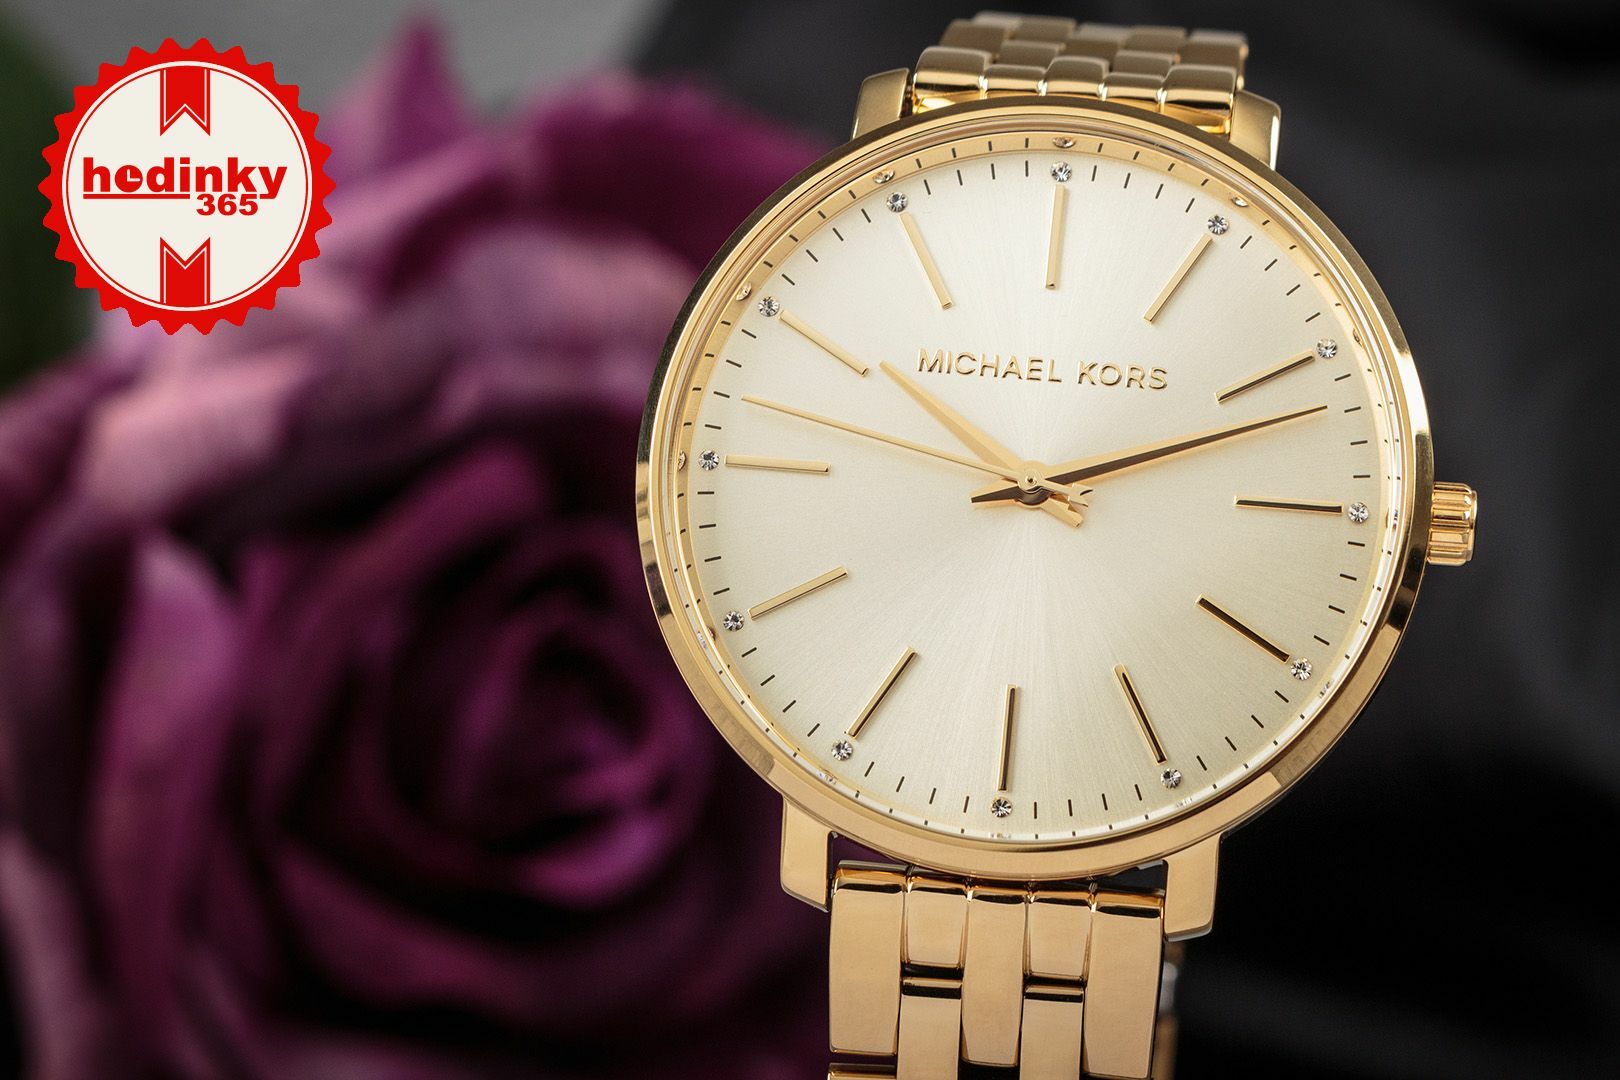 Michael Kors Charley Flowers 38mm White Gold Leather Womens Watch MK2821  for sale online  eBay